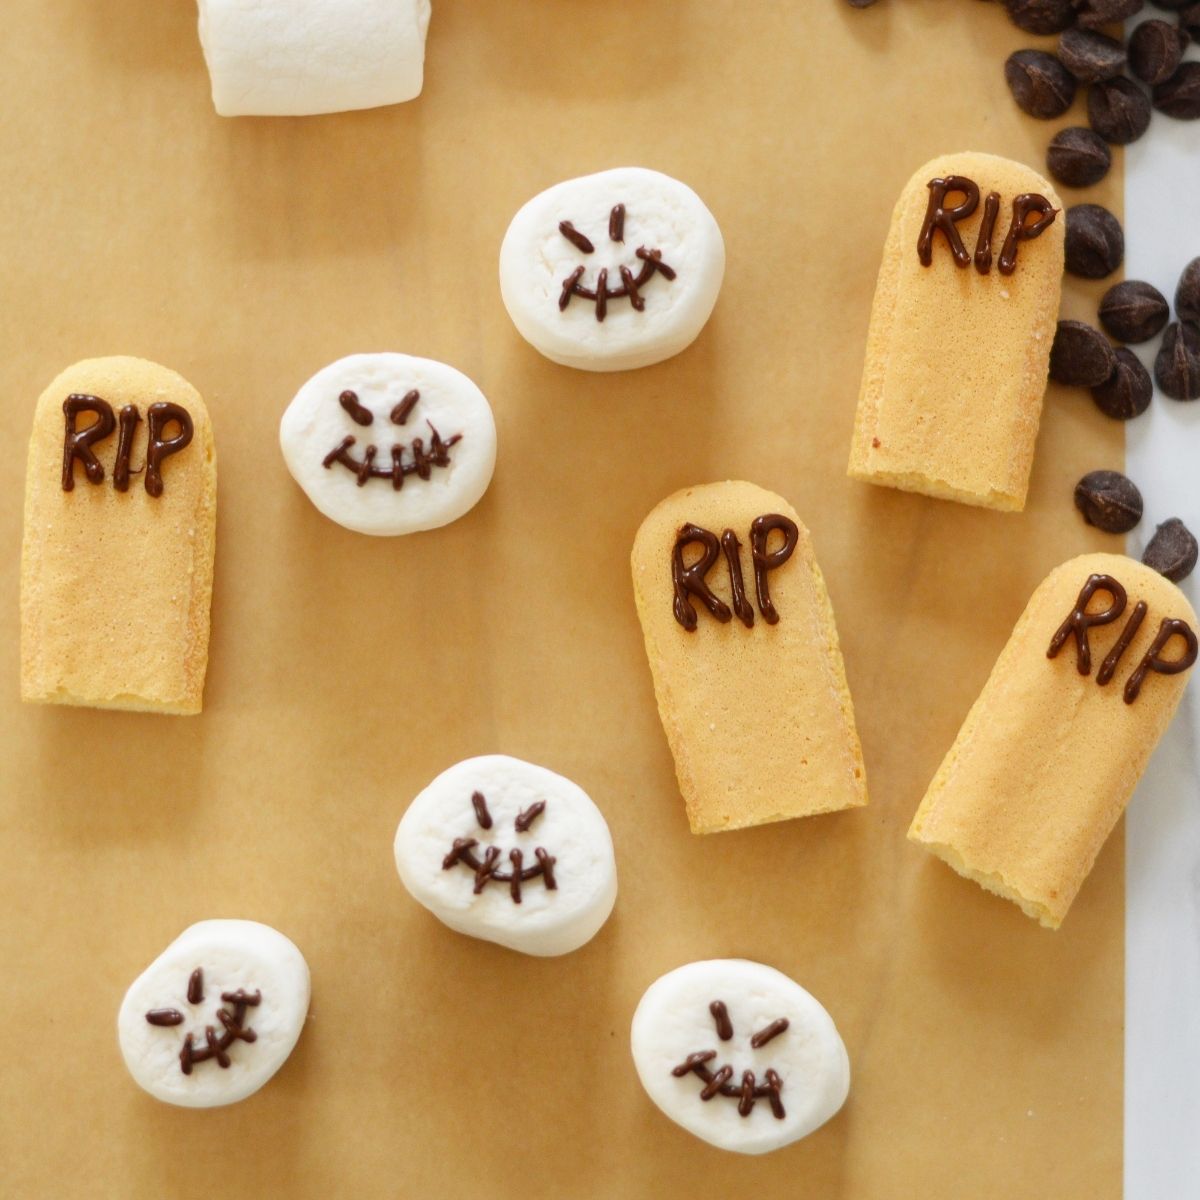 Homemade Disney treats are so much fun.  This graveyard tiramisu is made with coffee soaked lady fingers, a creamy mascarpone filling and dusted with cocoa powder.